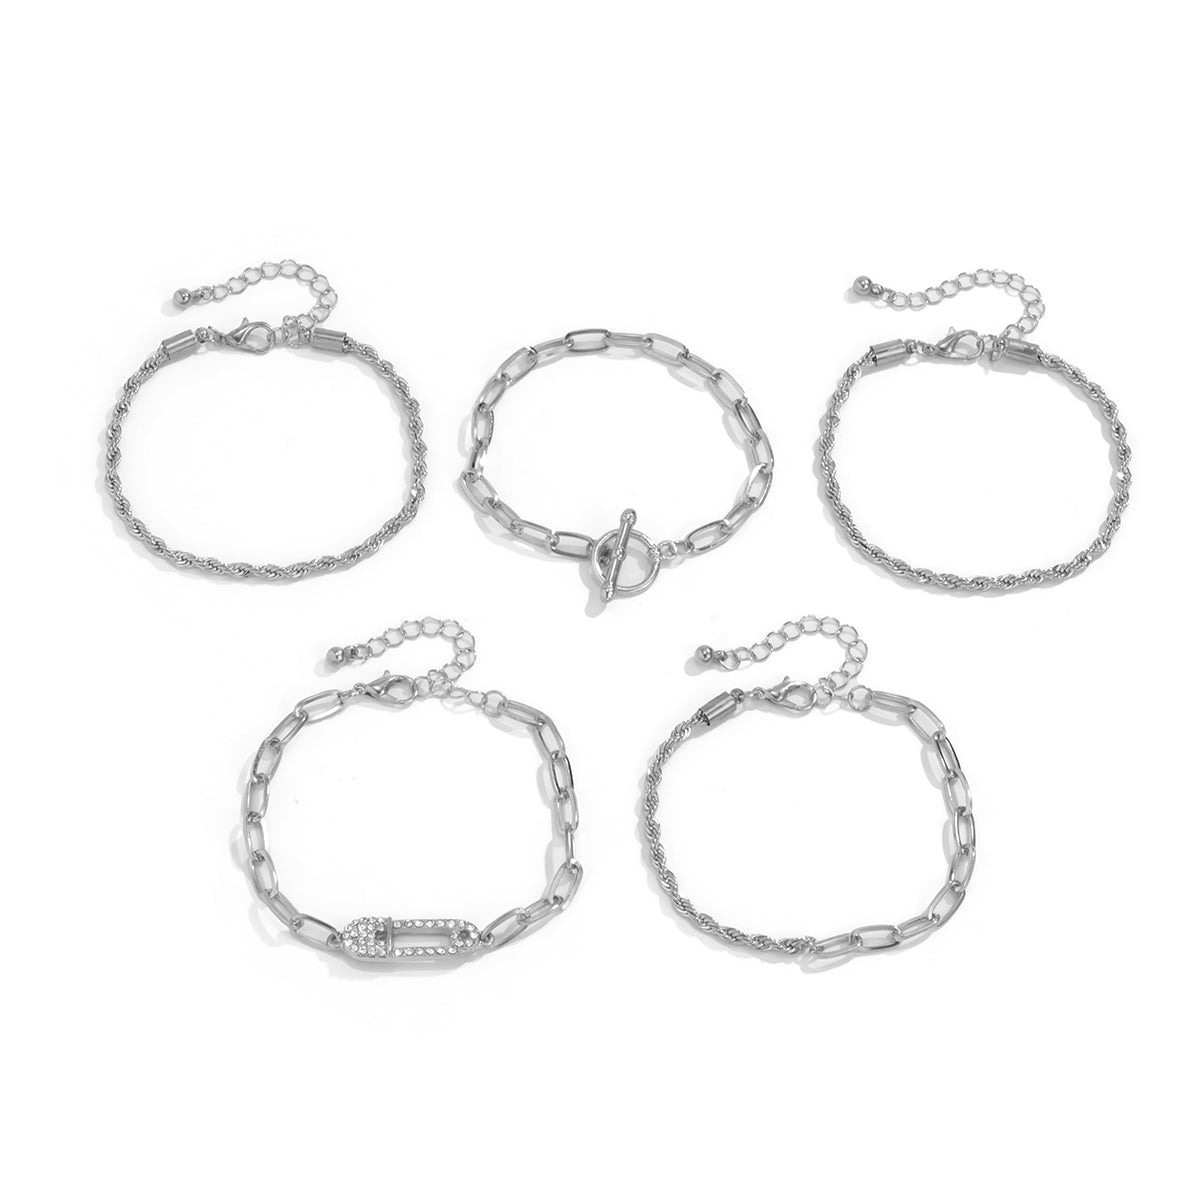 Cubic Zirconia & Silver-Plated Pin Charm Bracelet Set